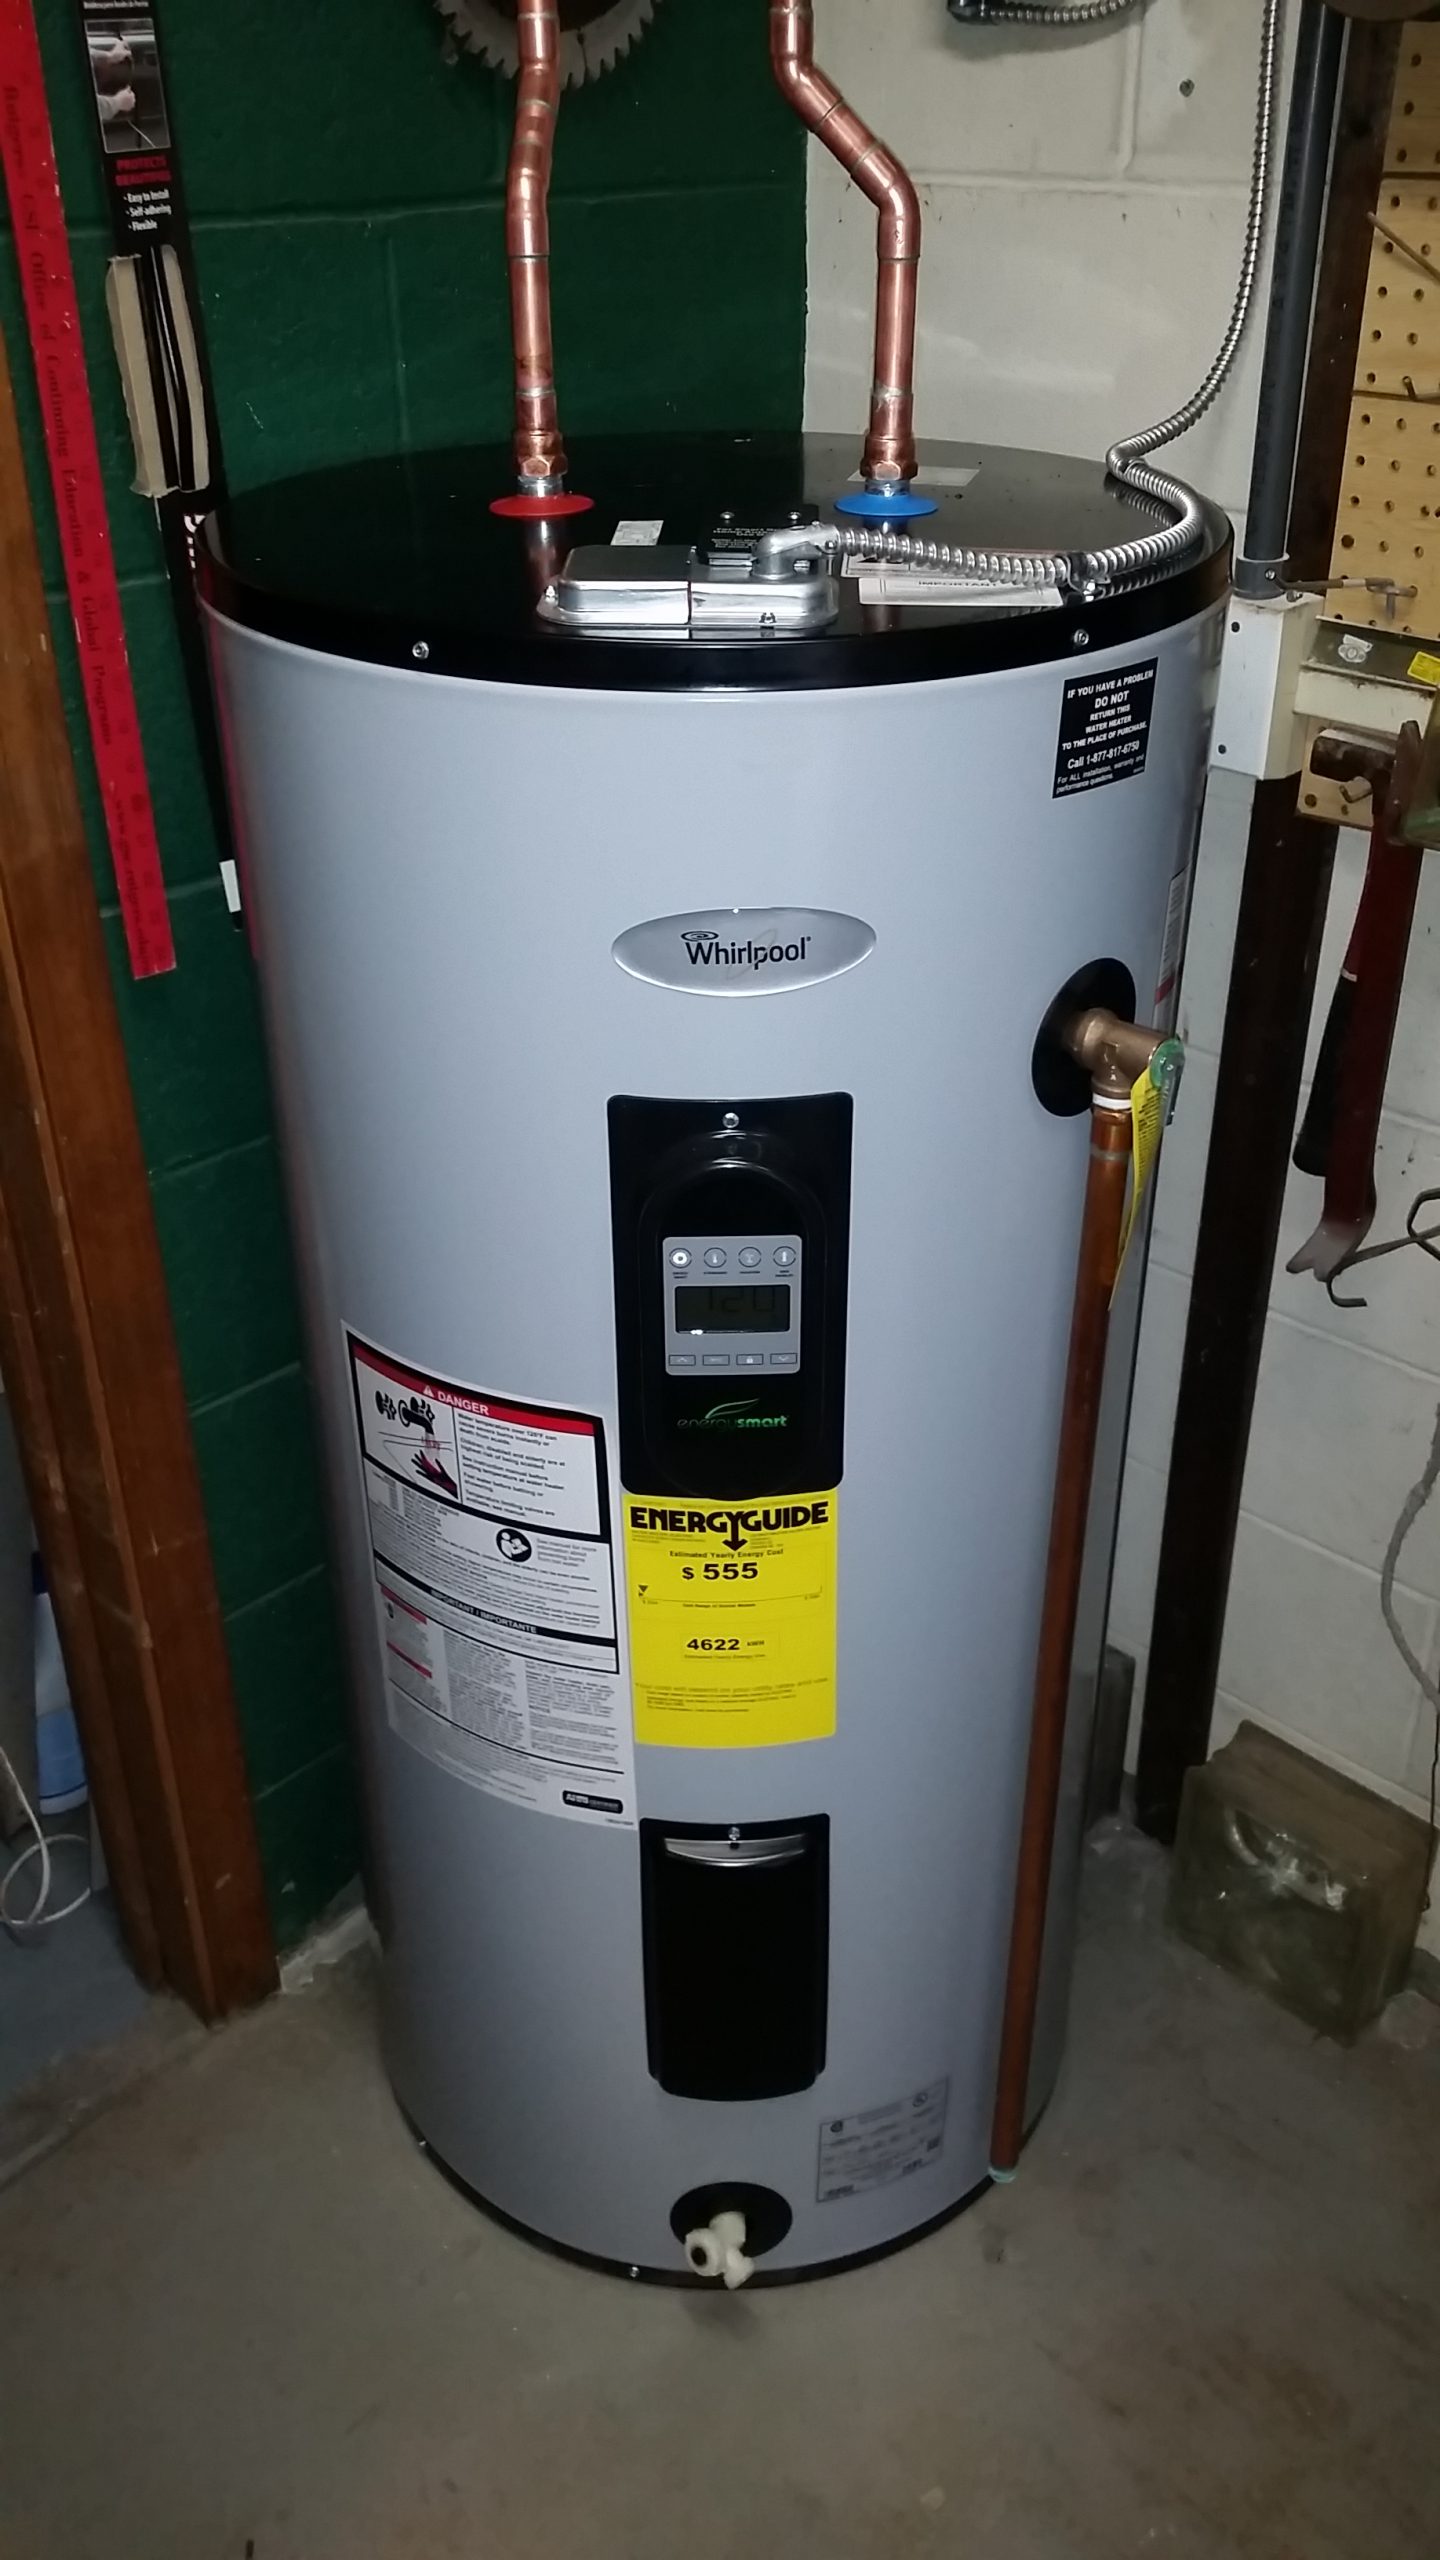 https://bsplumbinginc.com/wp-content/uploads/2022/02/services-page-for-water-heaters-scaled.jpg